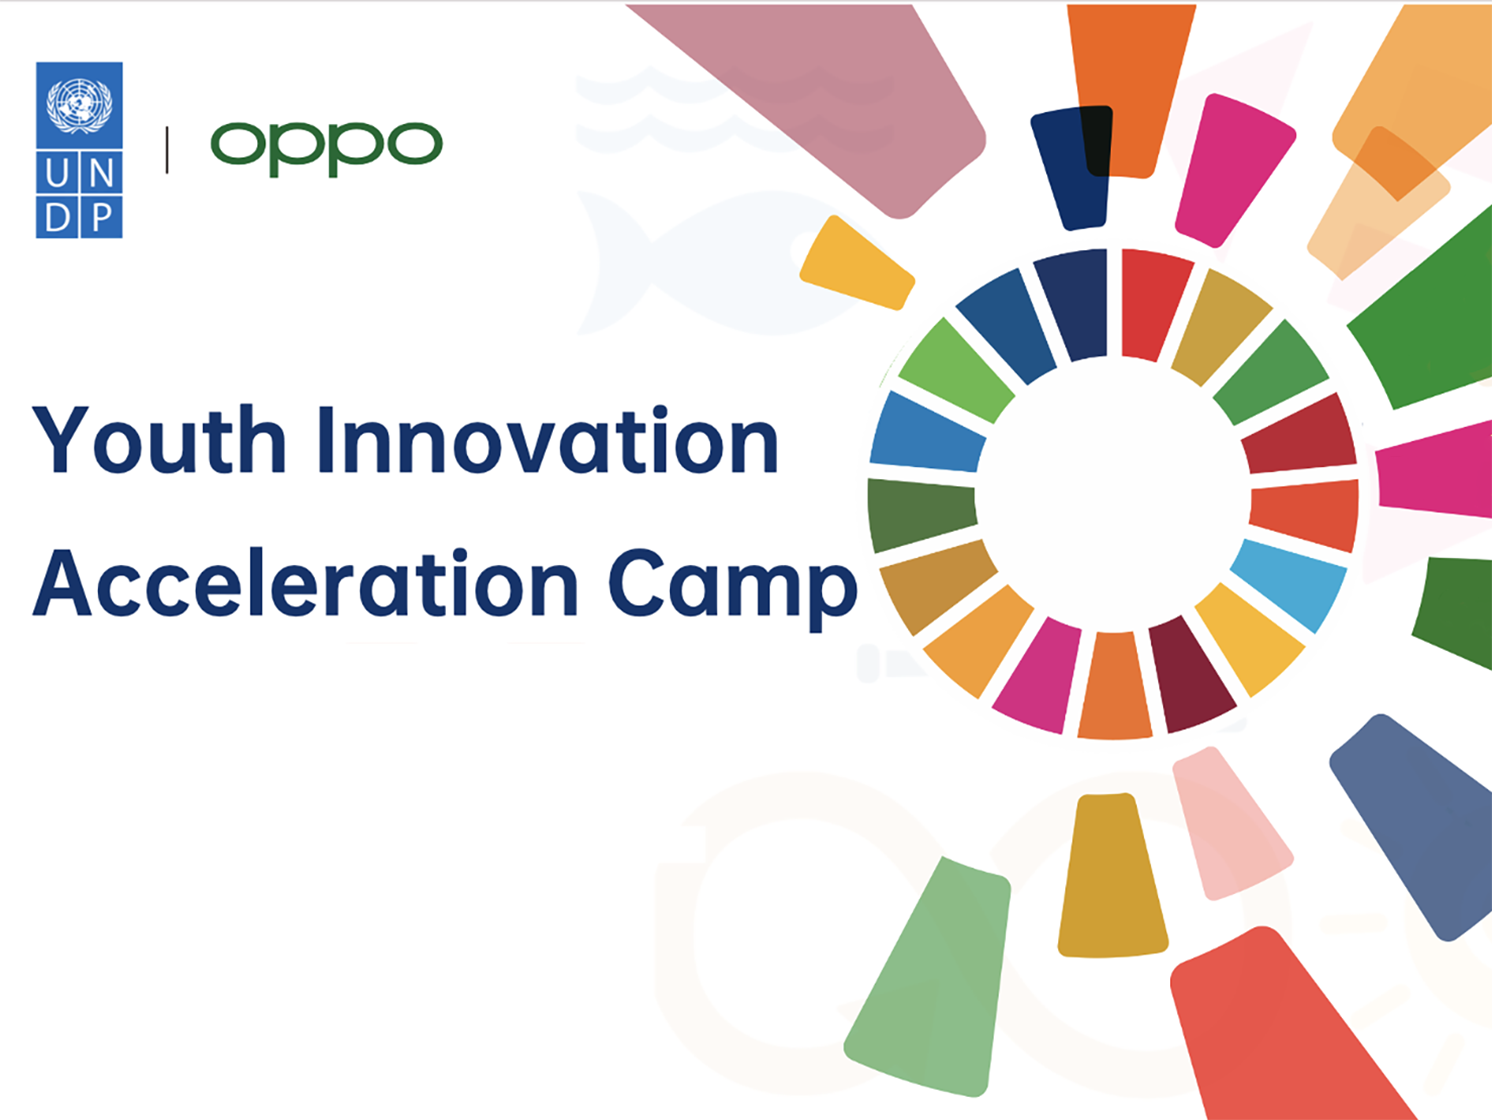 1640240930_OPPO_UNDP_Youth_Innovation_Acceleration_Camp